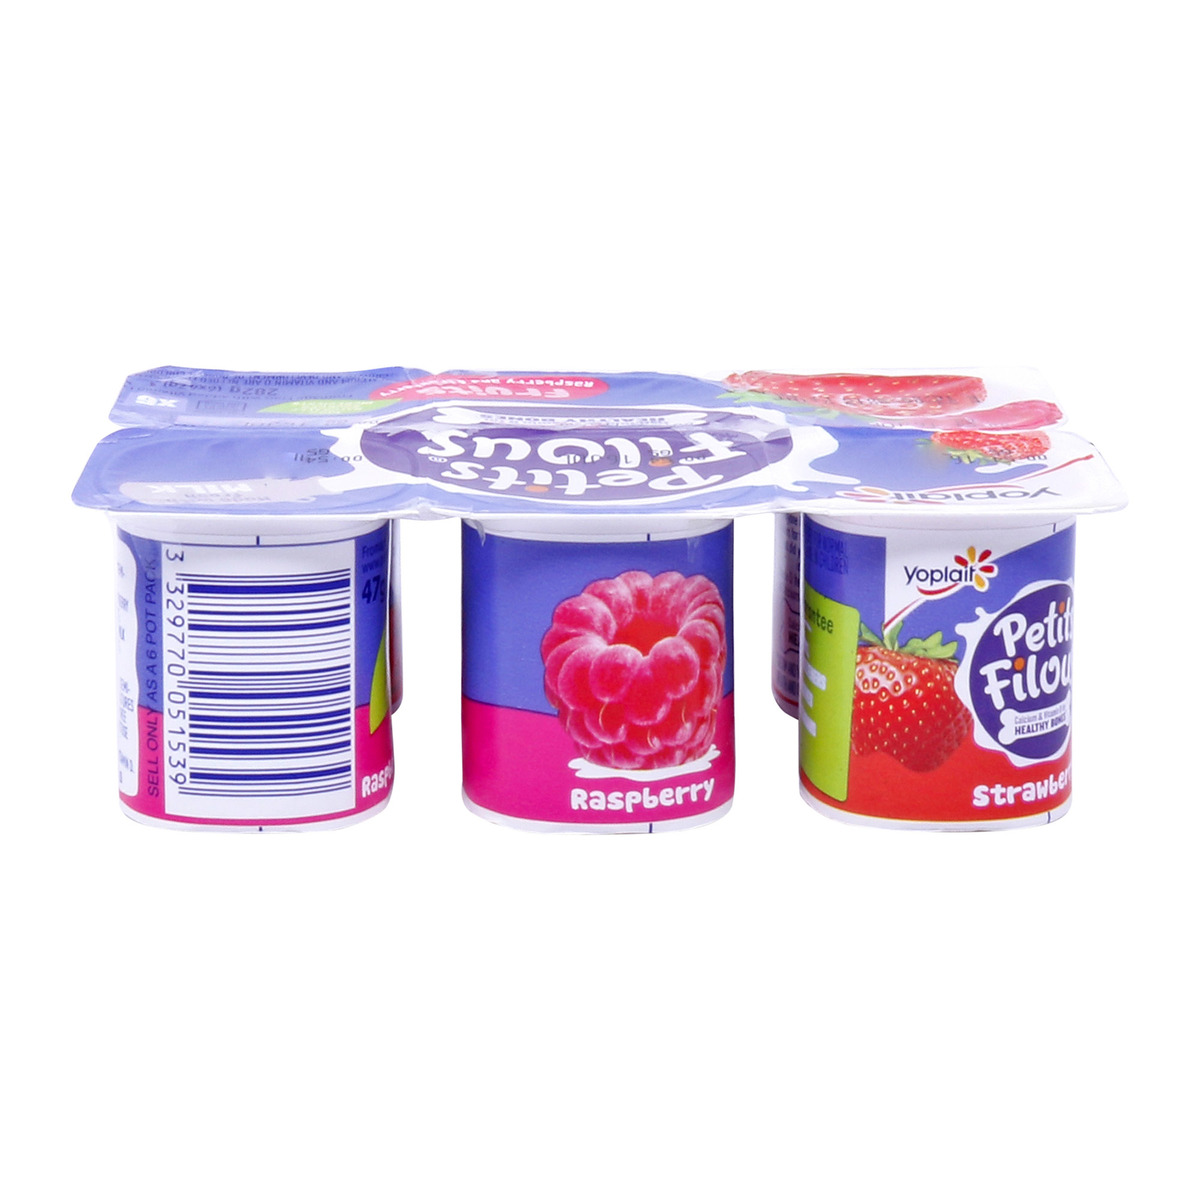 Yoplait Petits Filous Raspberry And Strawberry 6 X 47g Flavoured